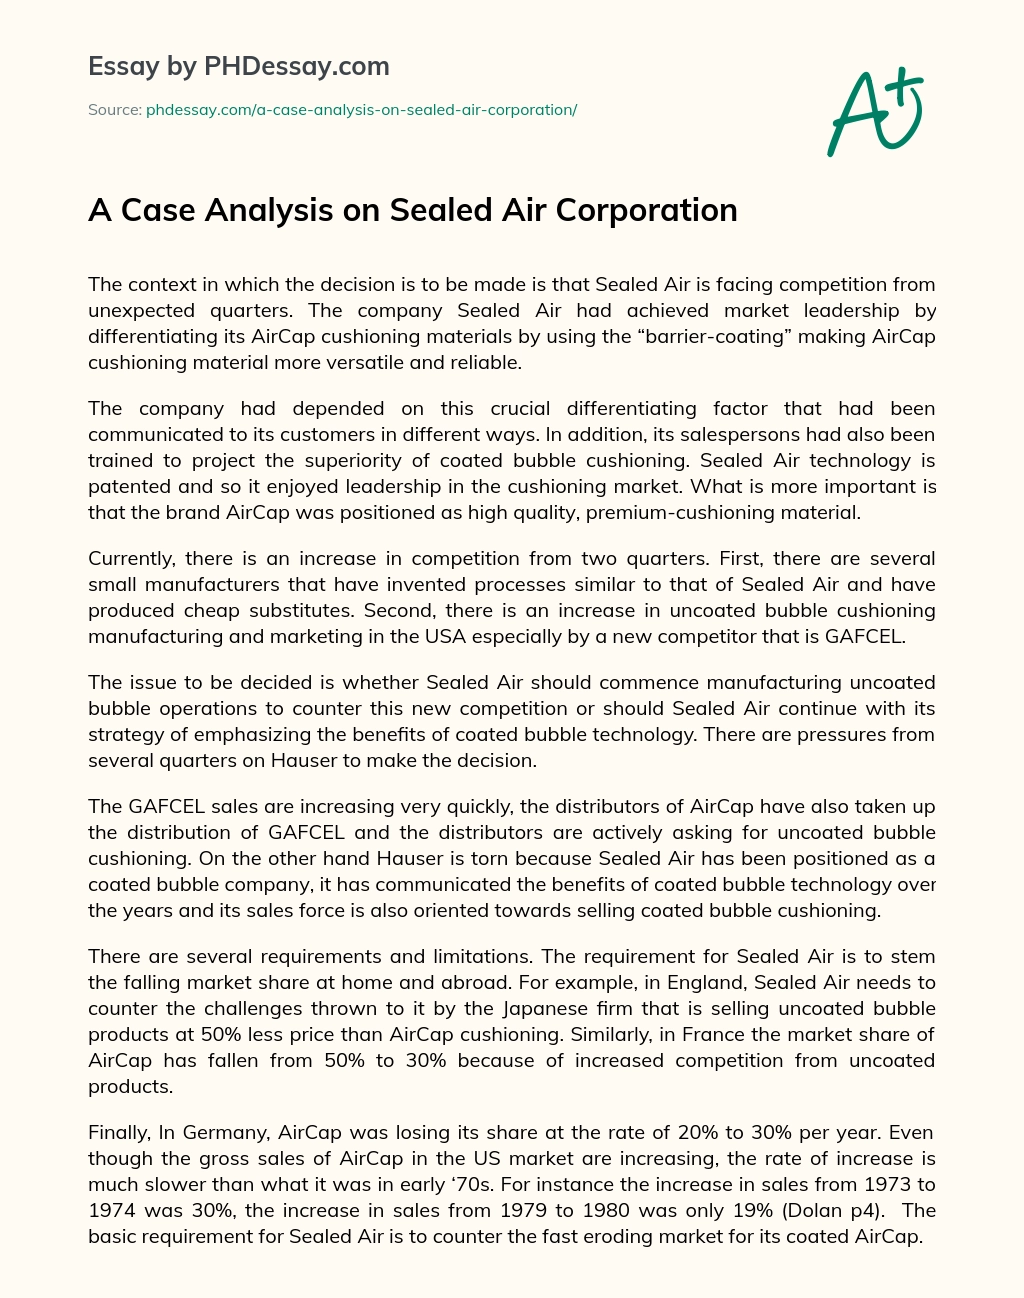 A Case Analysis on Sealed Air Corporation essay